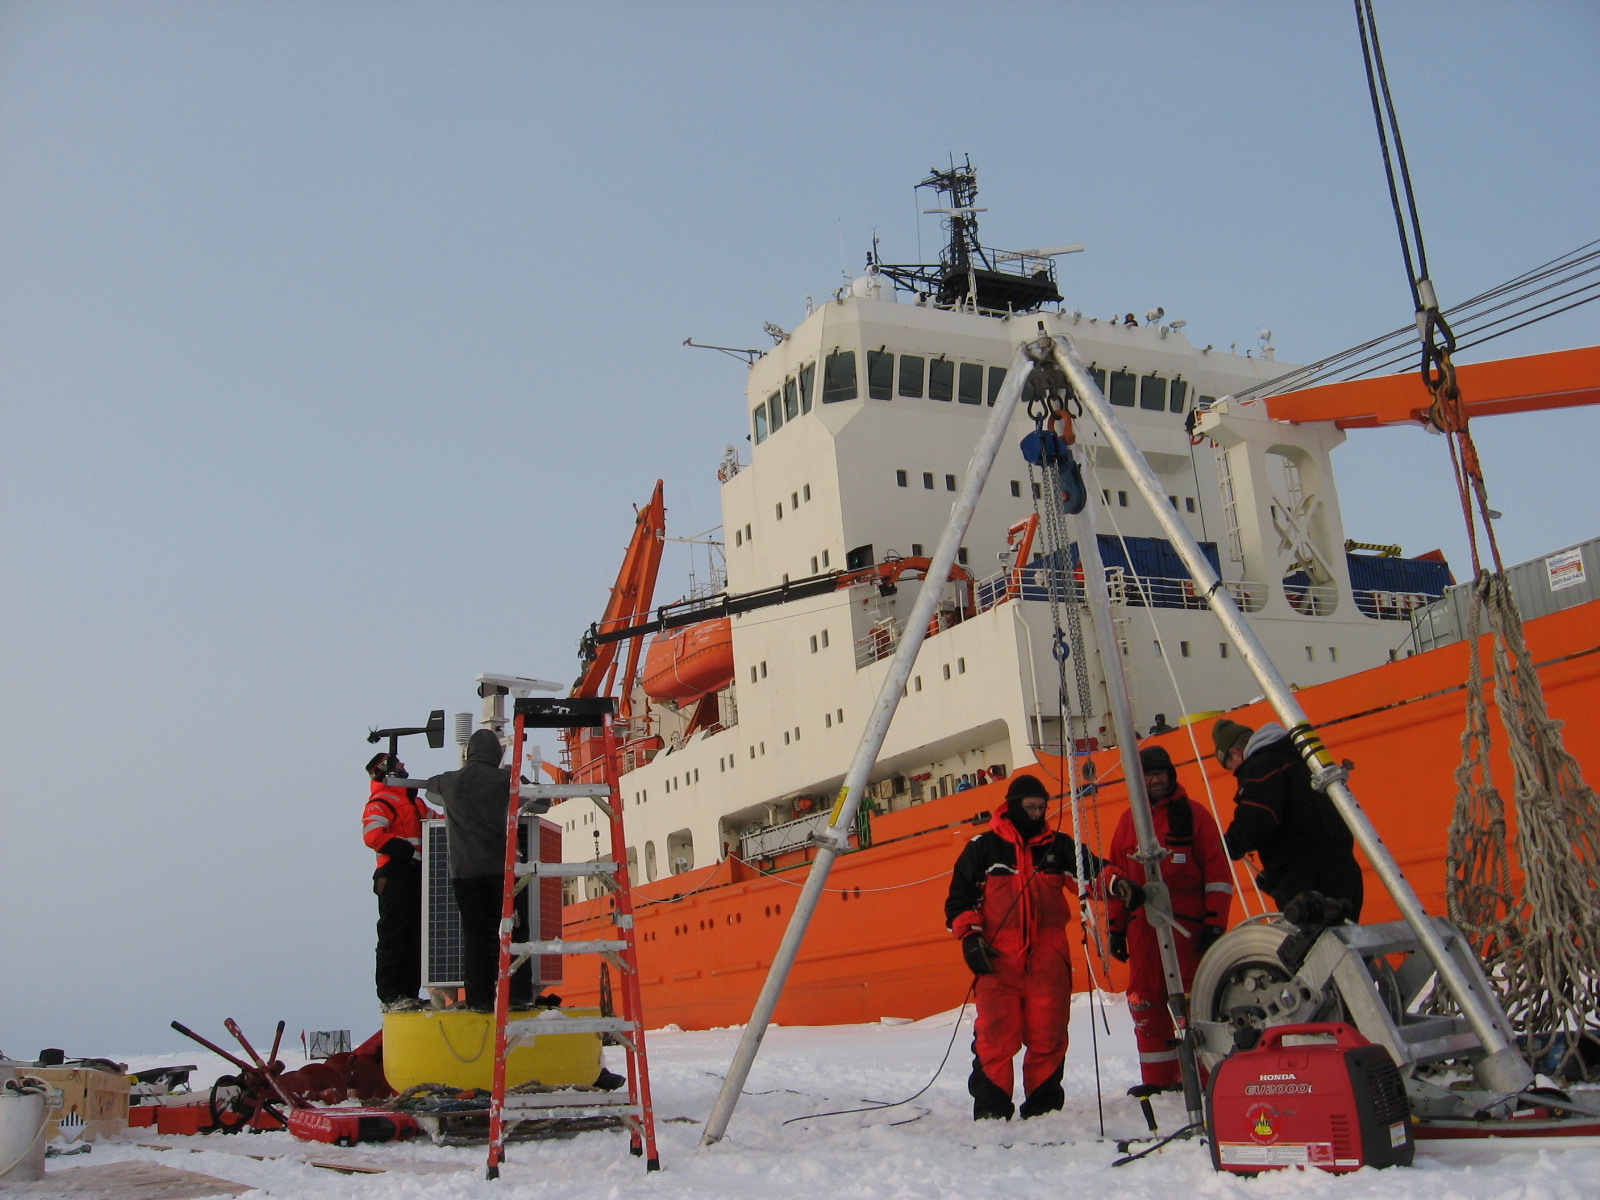 Carlton Rauschenberg and Vladimir Alexeev check the sensors on the O-buoy (left), while Dunn, Monsees and Keene transfer the ITP wire load from the winch to the tripod using a cable grip (right).  (Photo by Frank Bahr)